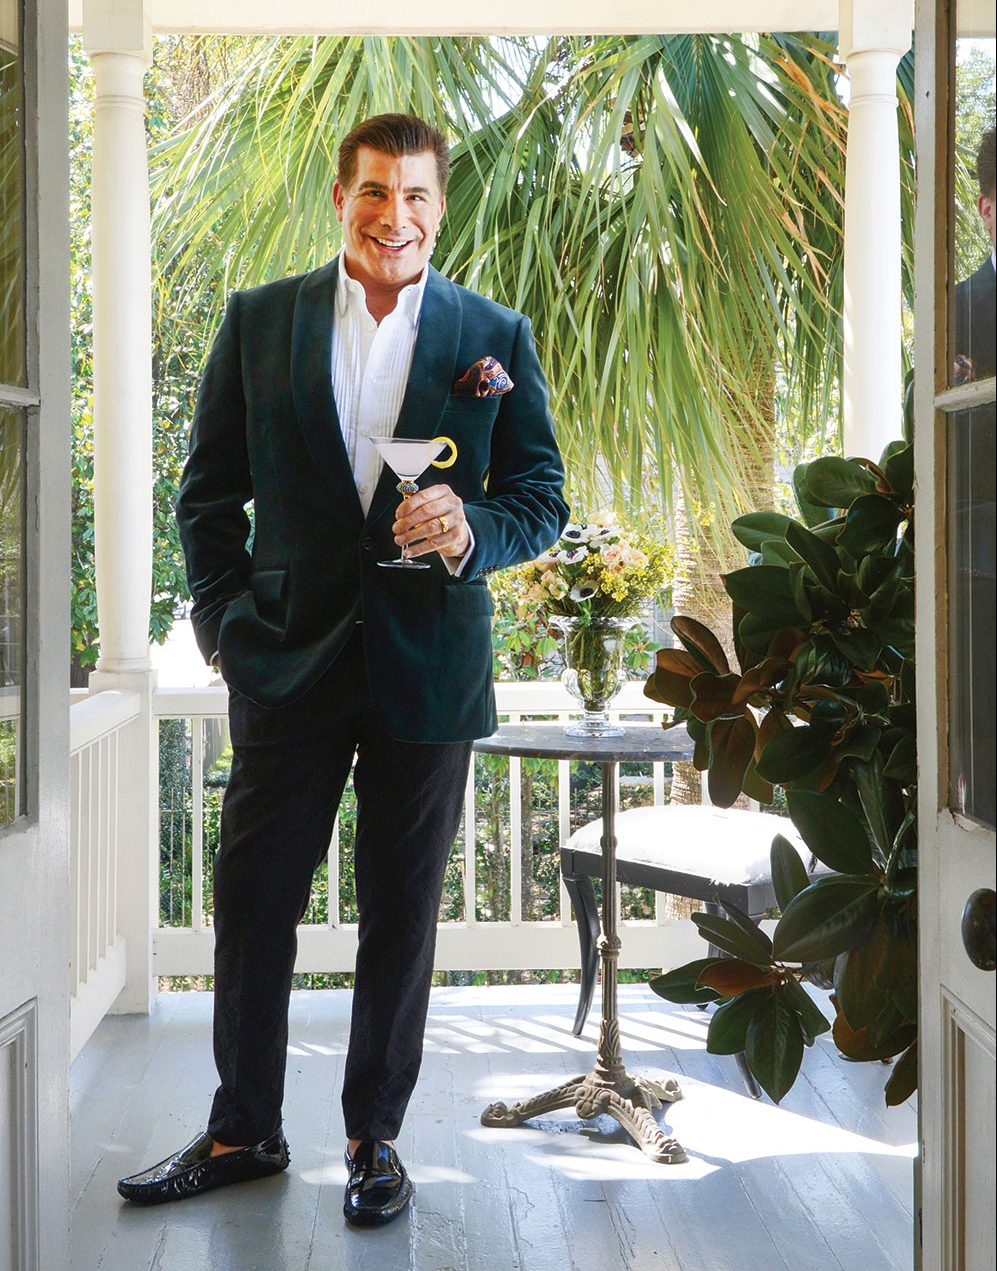 actor bryan batt stands on his covered porch, wearing a suit and holding a cocktail in a martini glass